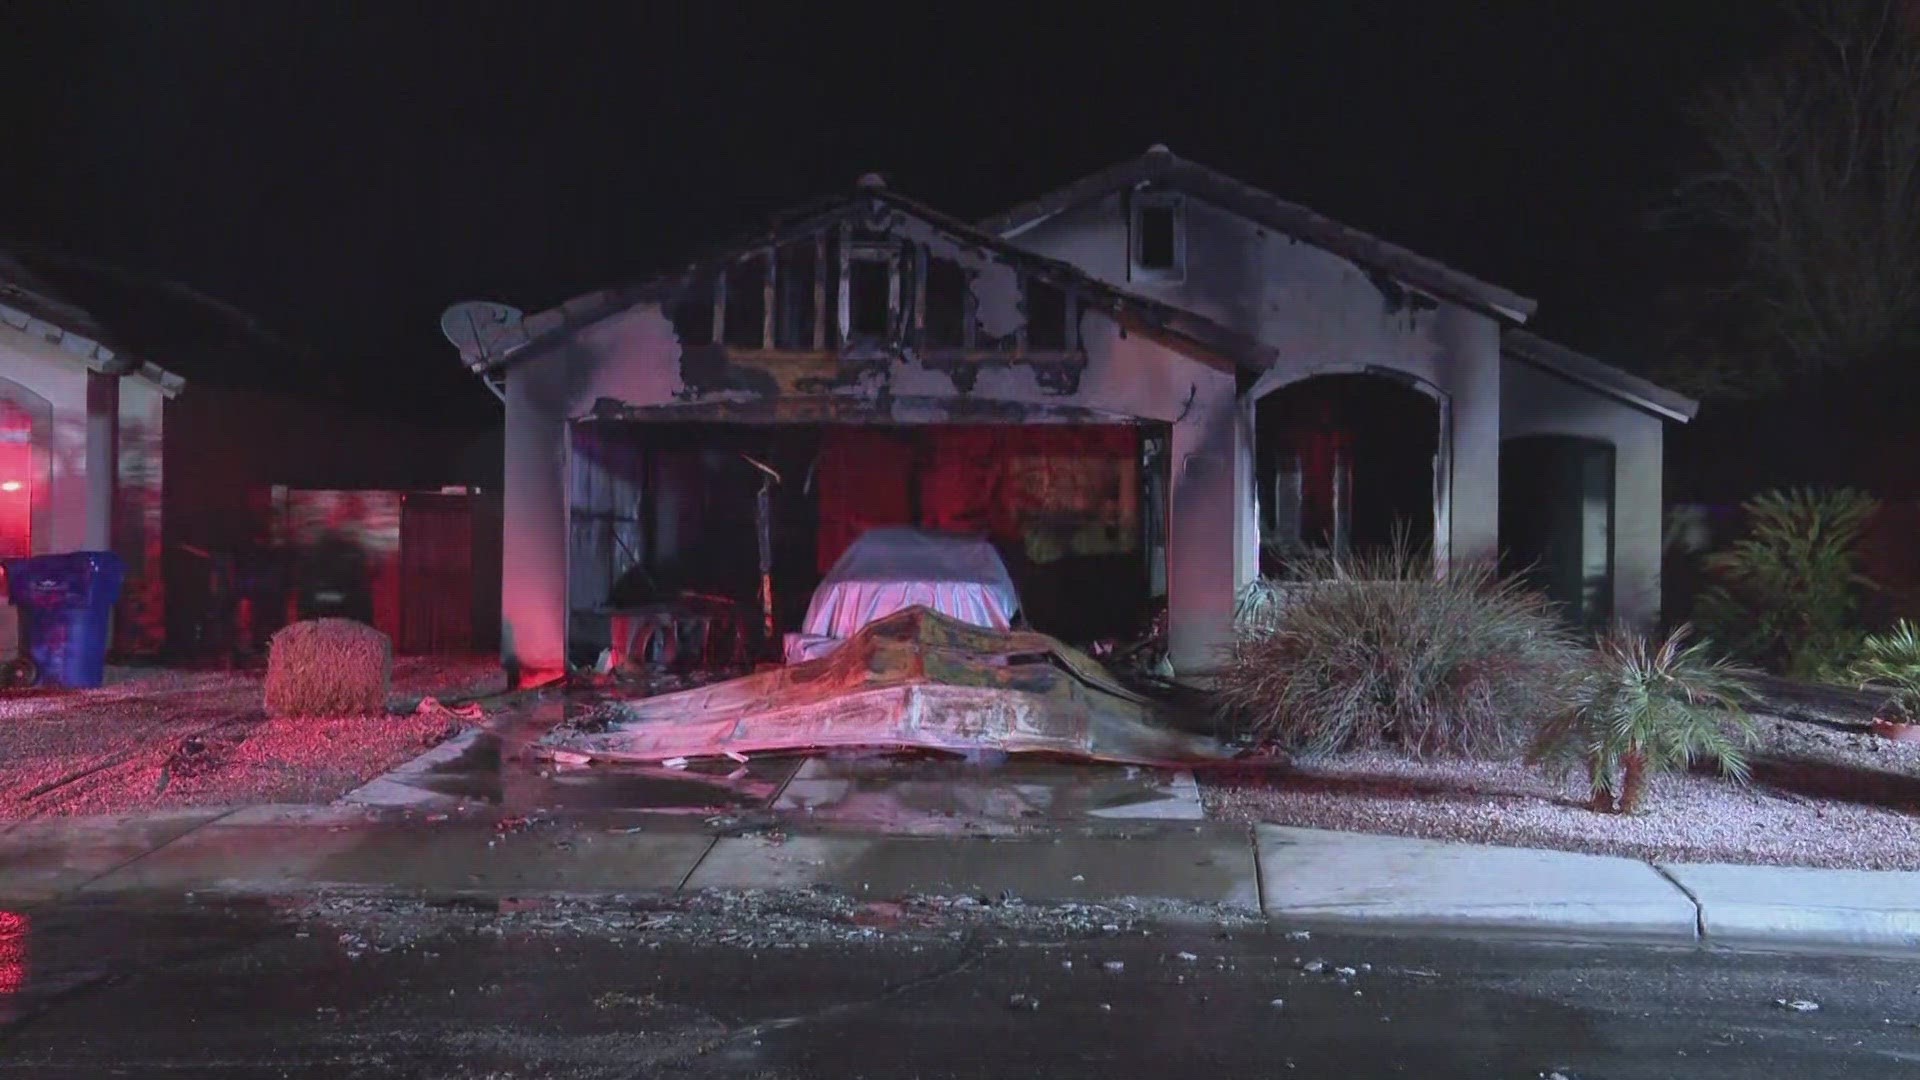 The Surprise Fire Medical Department said the fire happened at a house near Dysart and Greenway roads.